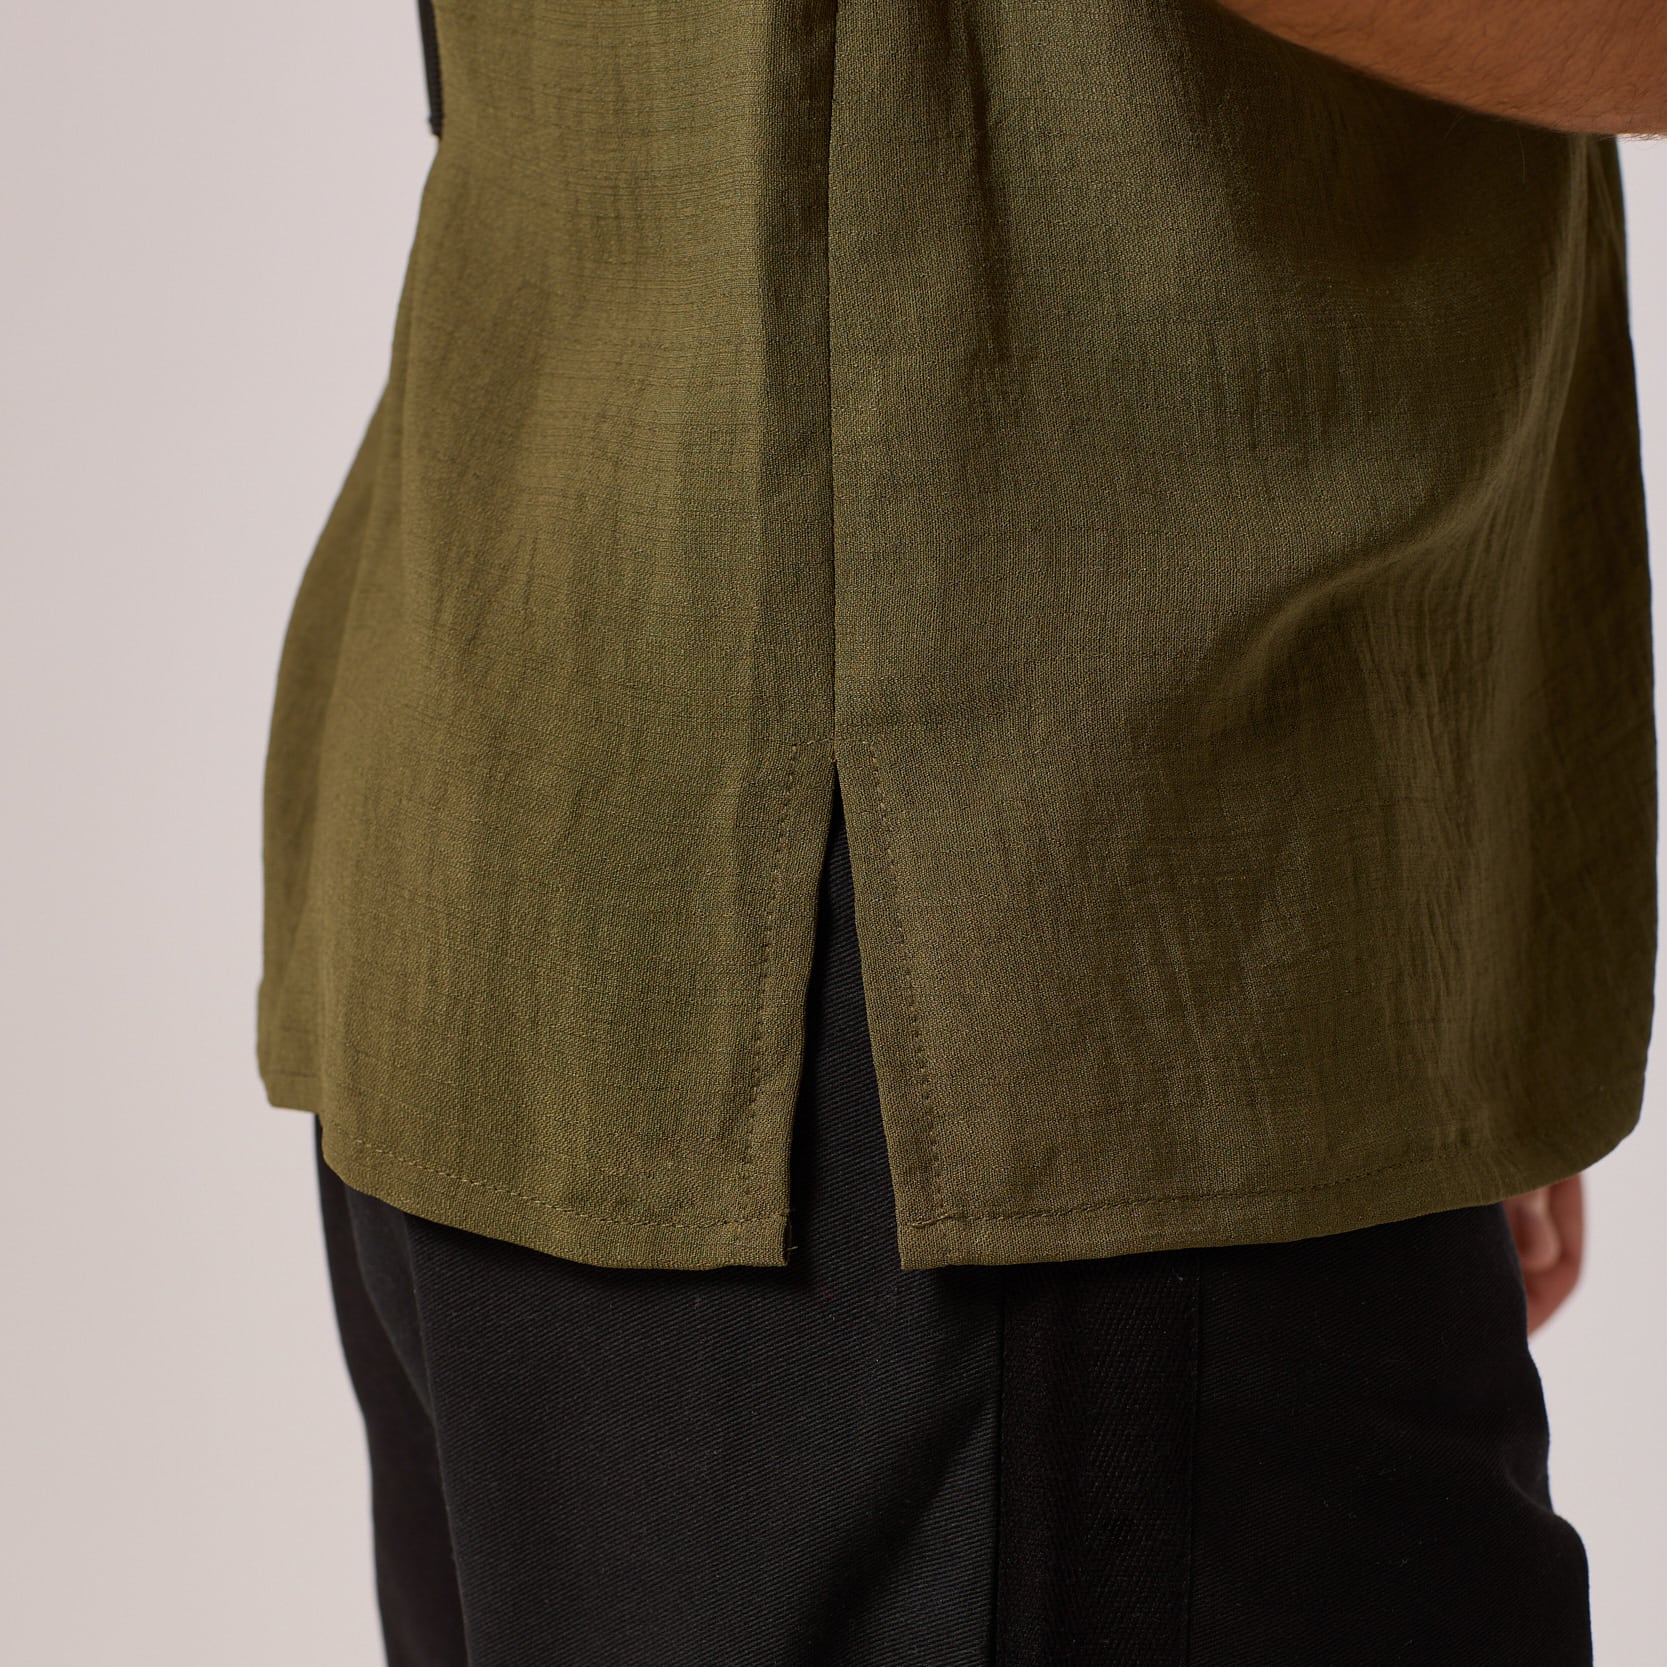   ZERØ London - Close up view, olive green mens zero waste vest designed & made in London